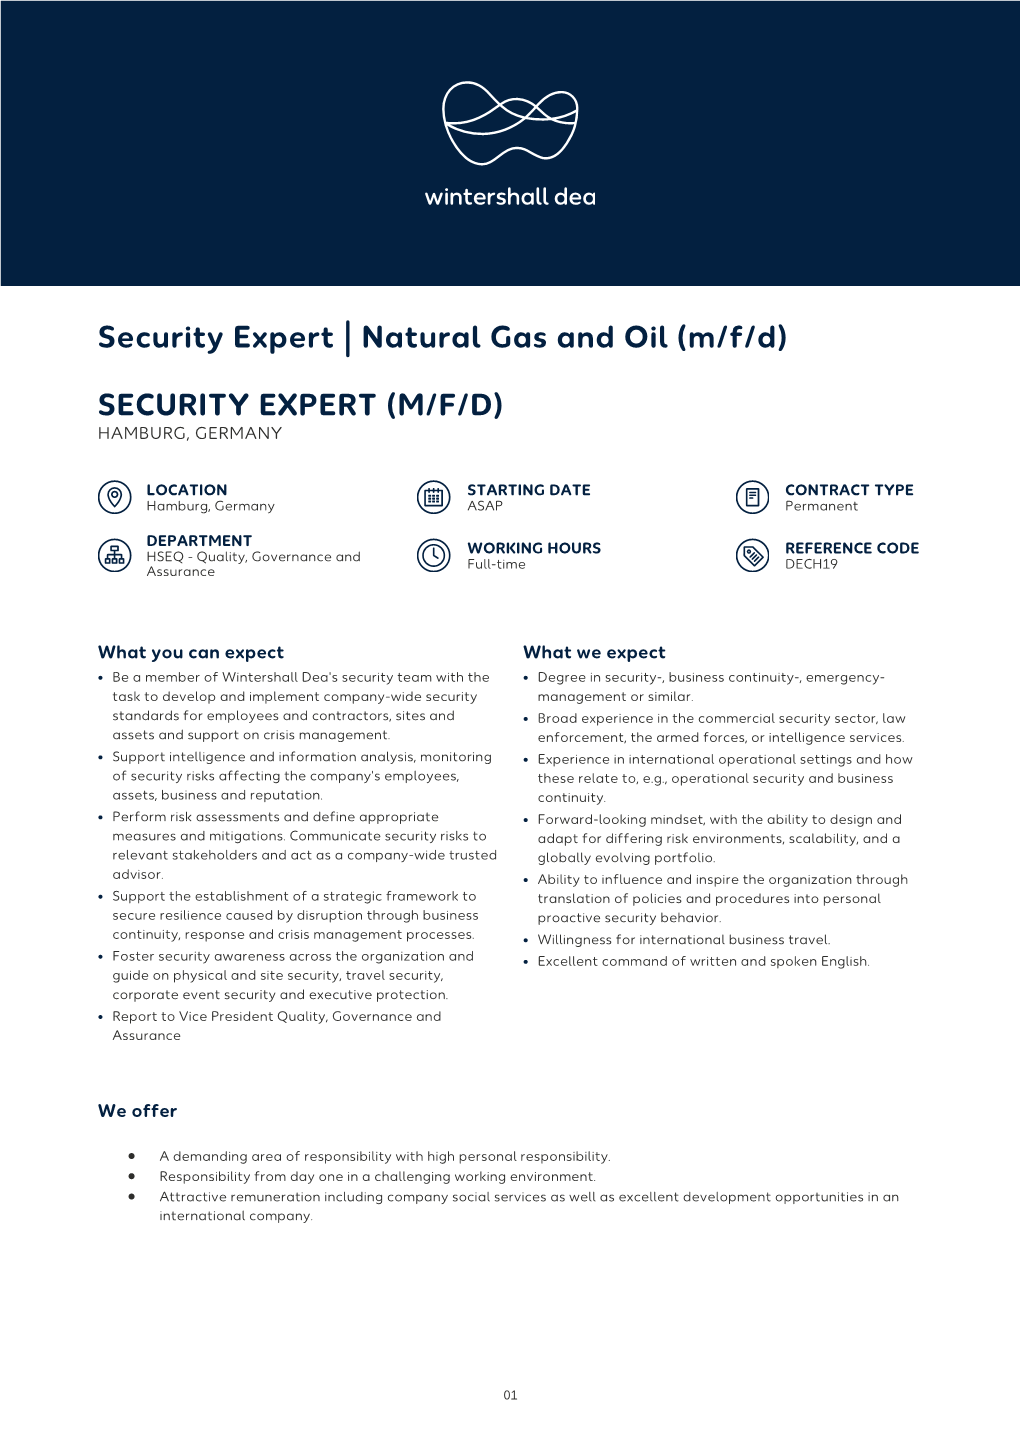 Natural Gas and Oil (M/F/D) SECURITY EXPERT